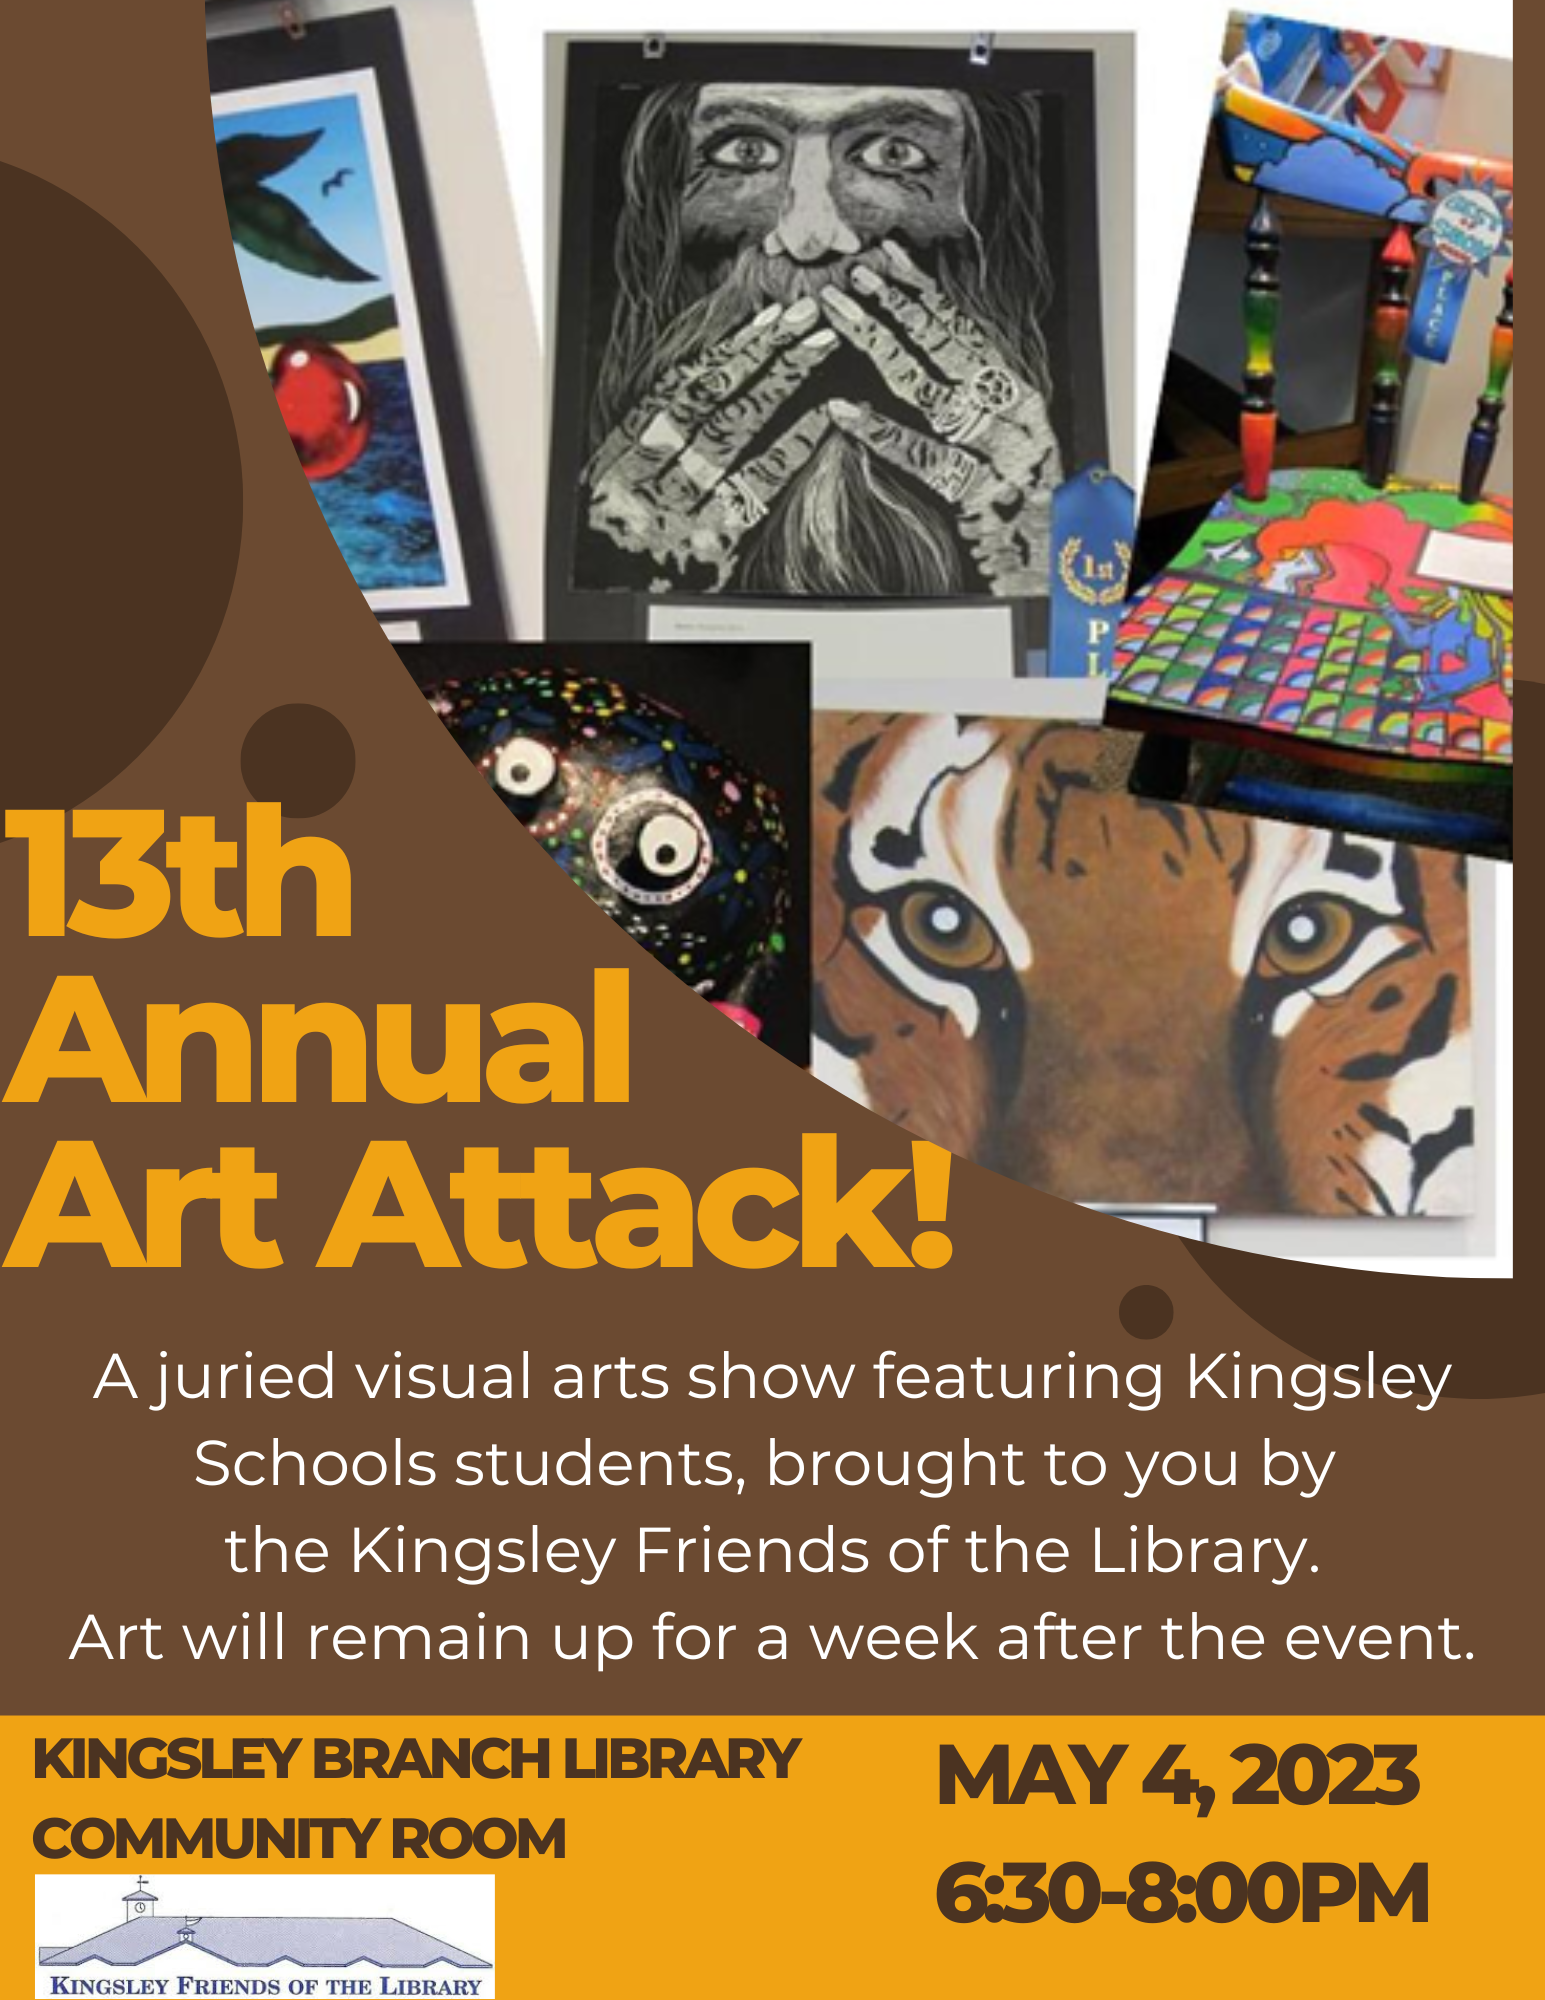 Flyer says "13th annual art attack," and there is a painting of a tiger and a line drawing of a man's face on the flyer.